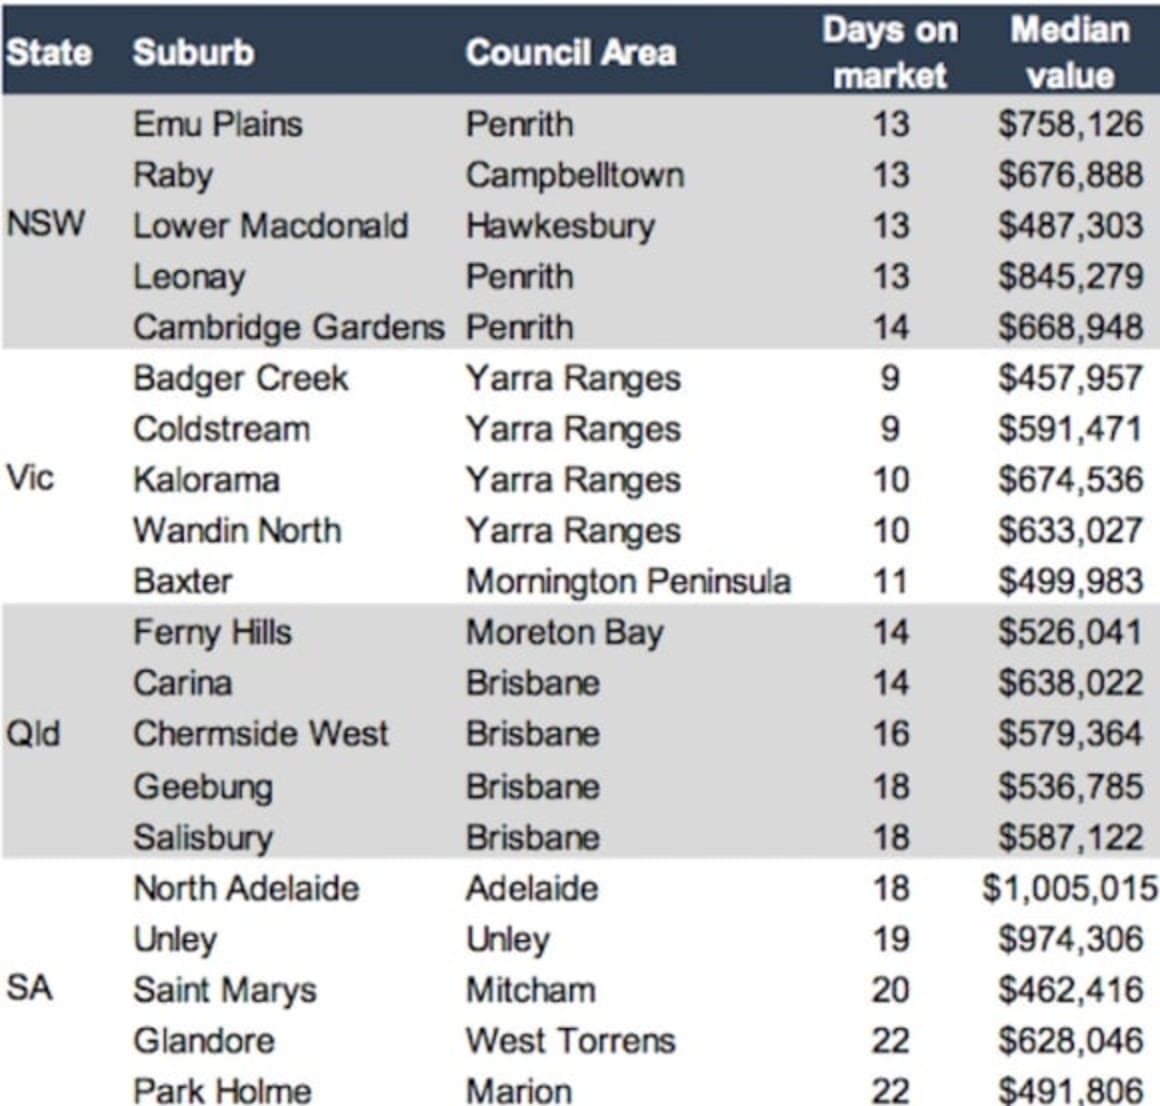 The fastest selling suburbs where homes are flying off the shelves 